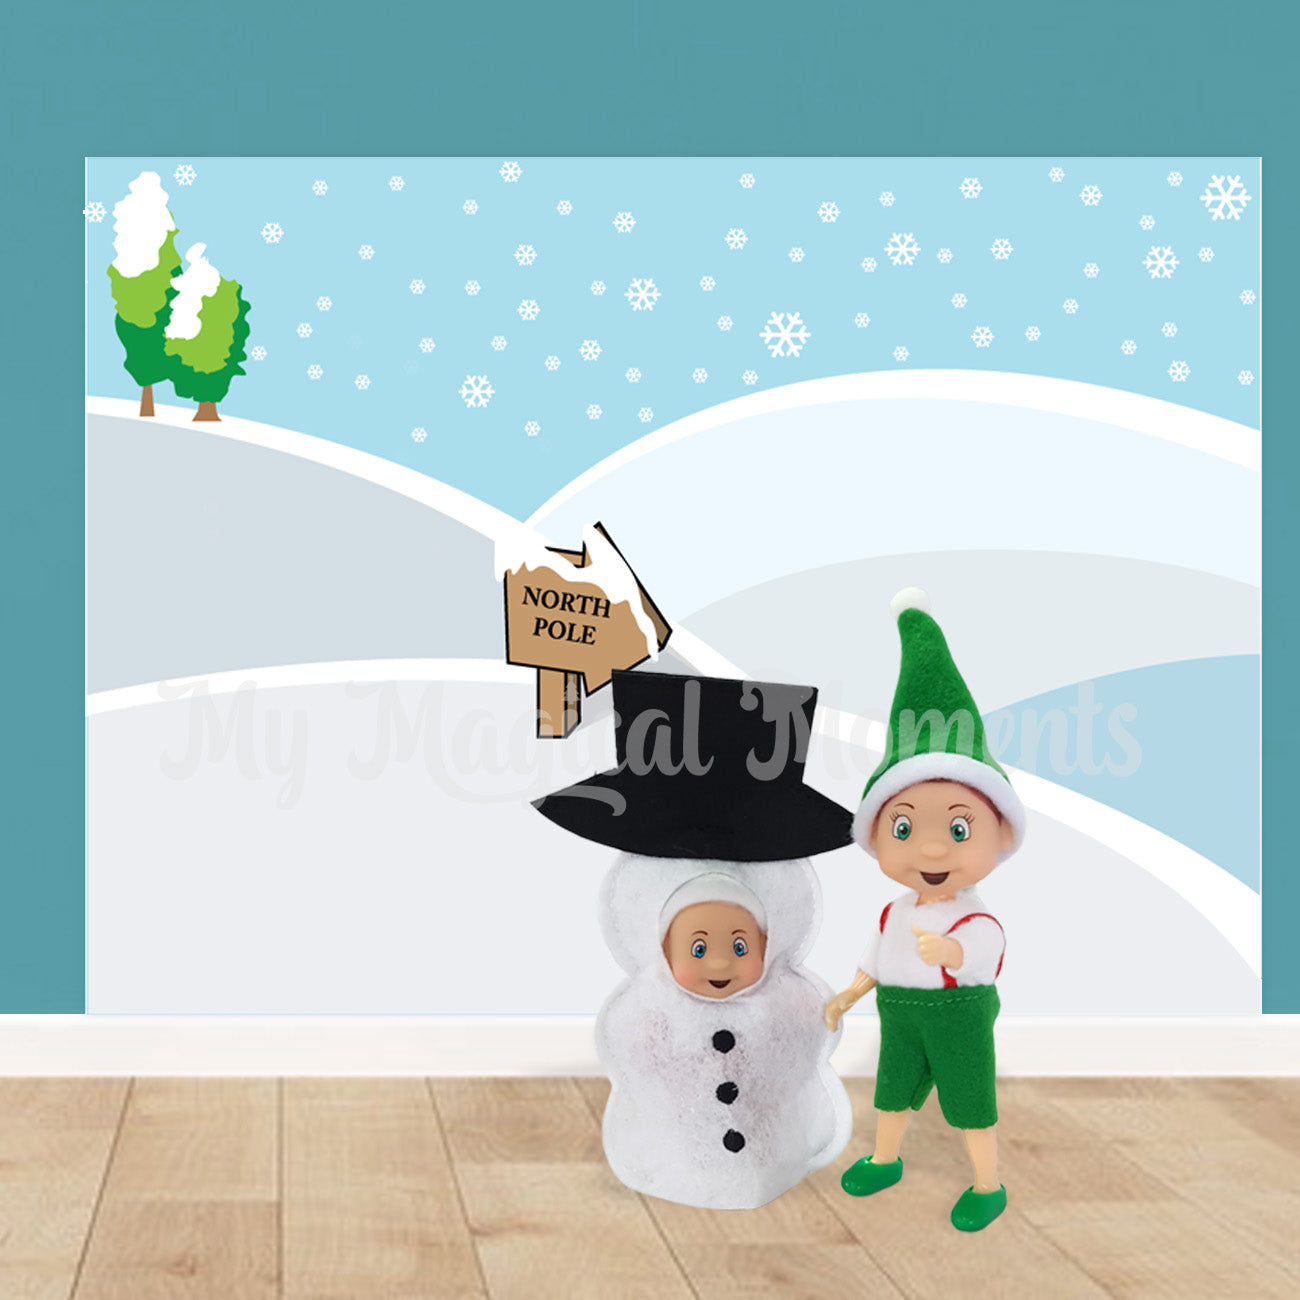 Elf baby dressed as snowman with toddler elf